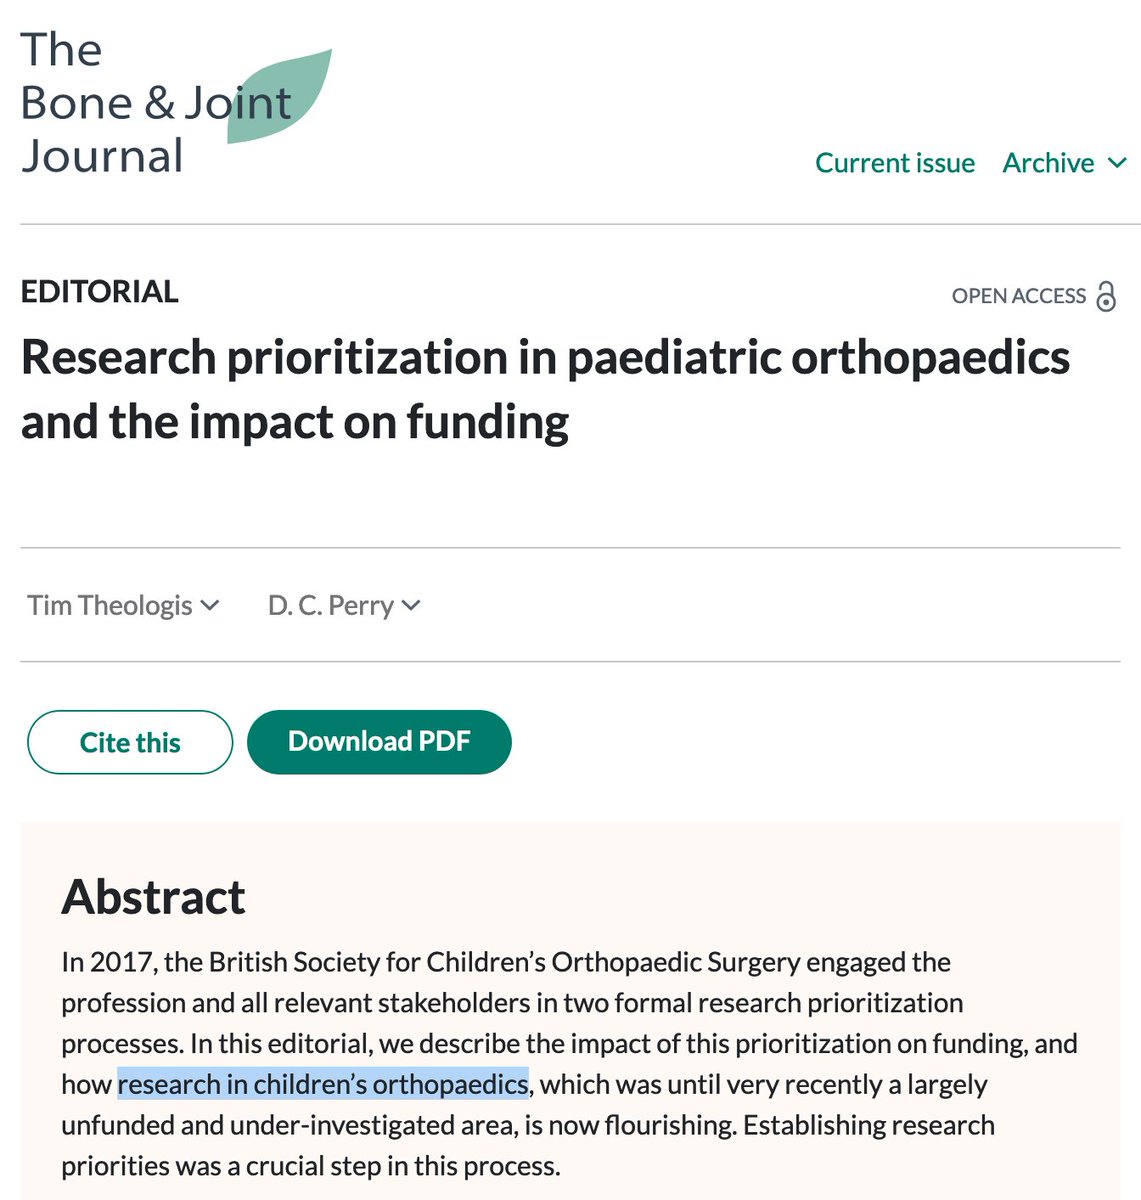 Terrific leadership by @MrDanPerry @TimTheologis @BSCOS_UK to use @LindAlliance priority setting to increase and target research in children’s orthopaedics on most important topics @BoneJointJ boneandjoint.org.uk/Article/10.130…